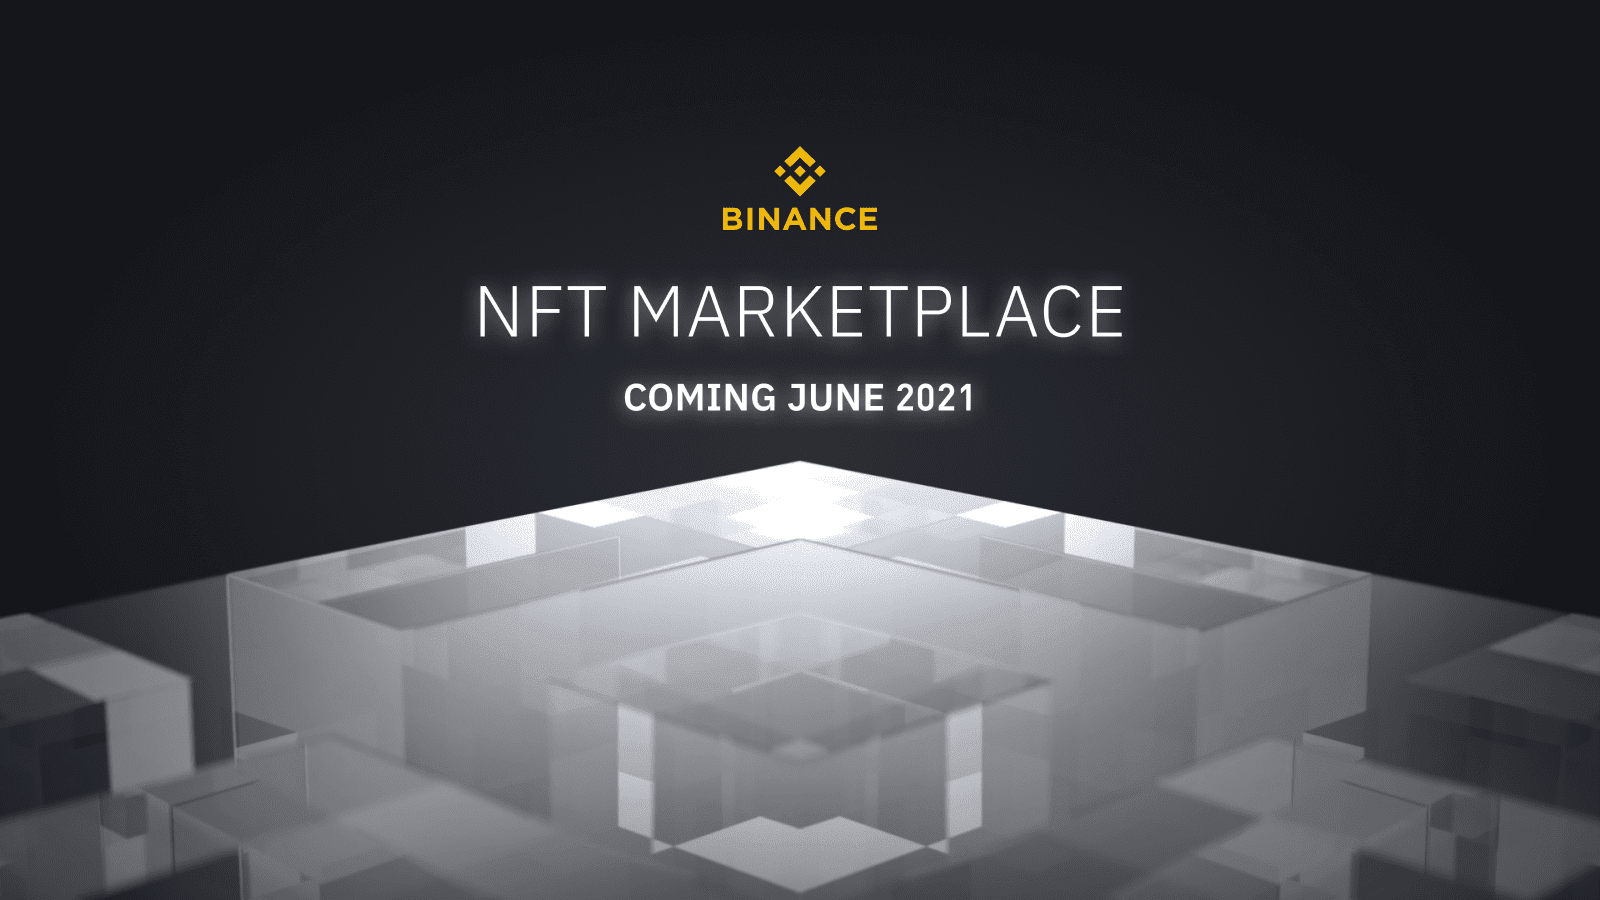 Binance Is Launching Its Own NFT Marketplace in June